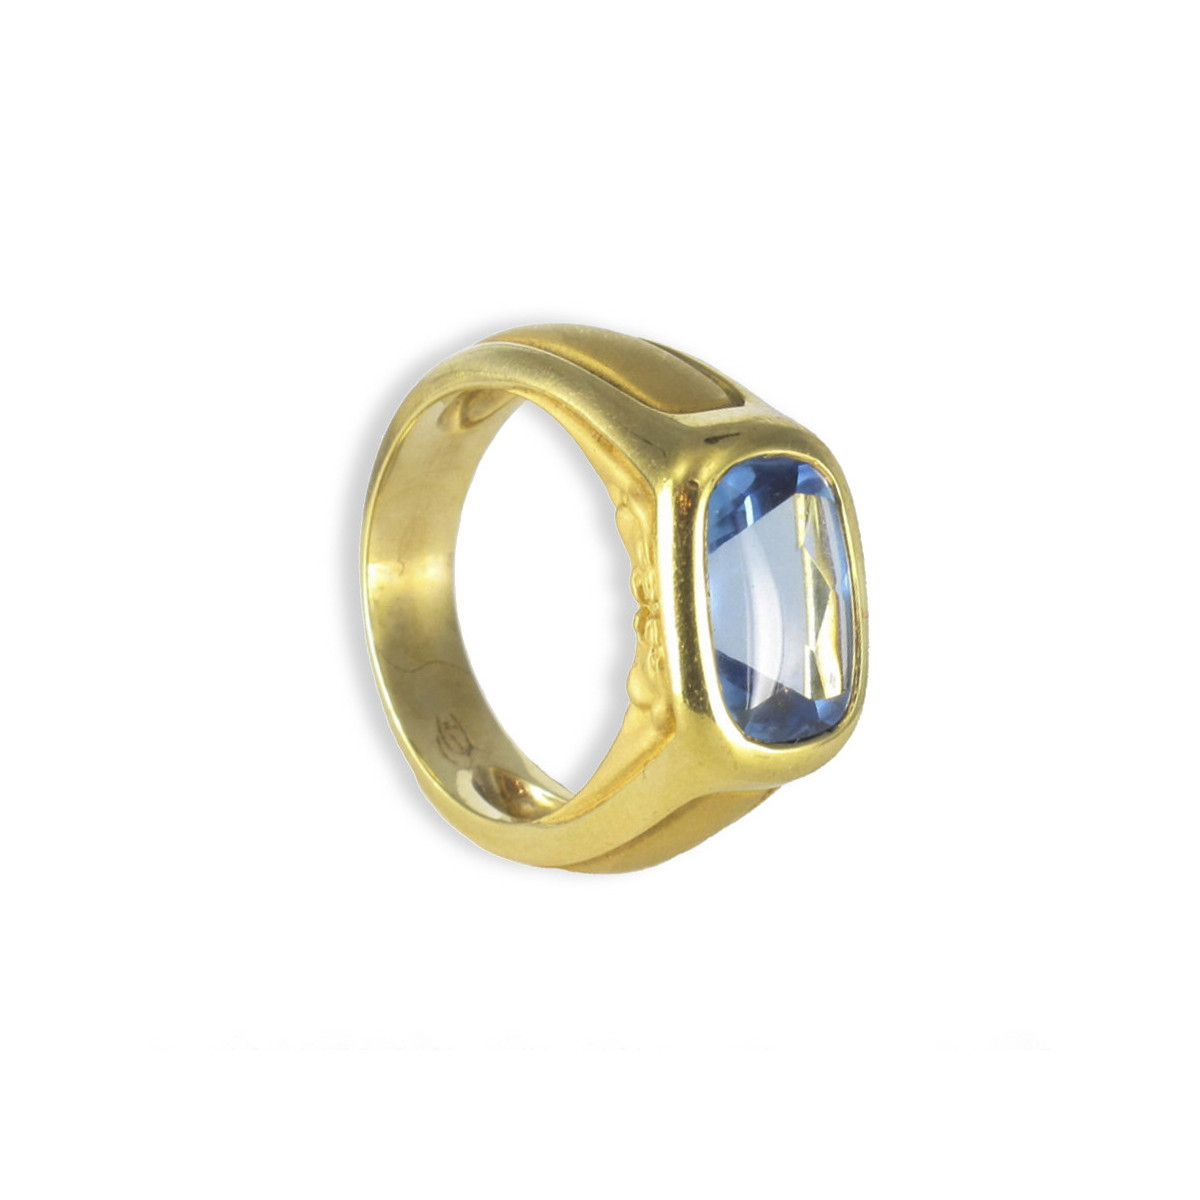 TWO PANTHERS BLUE QUARTZ GOLD RING